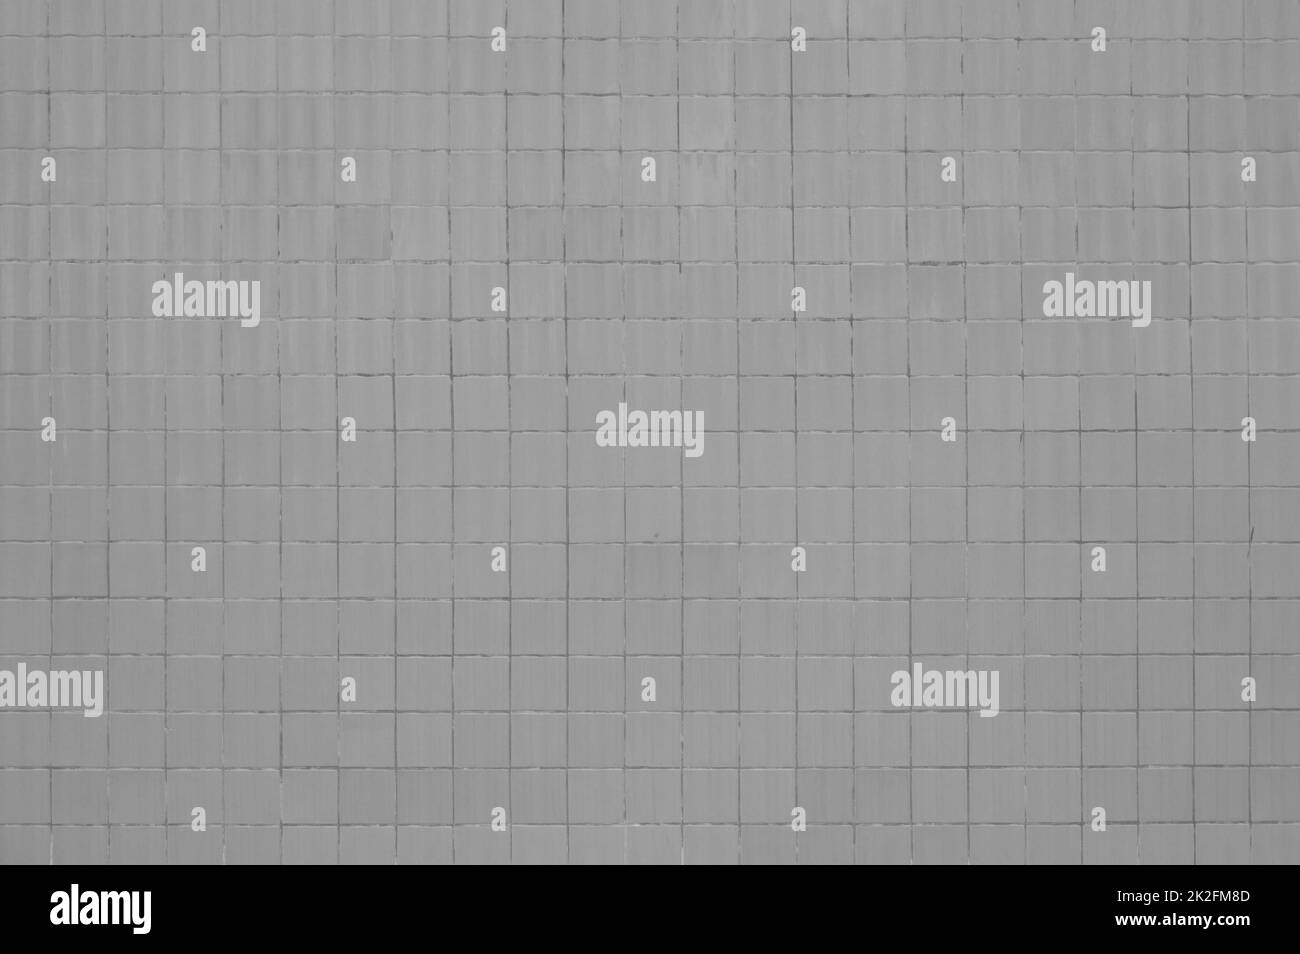 Grunge wall with grey tiles Stock Photo